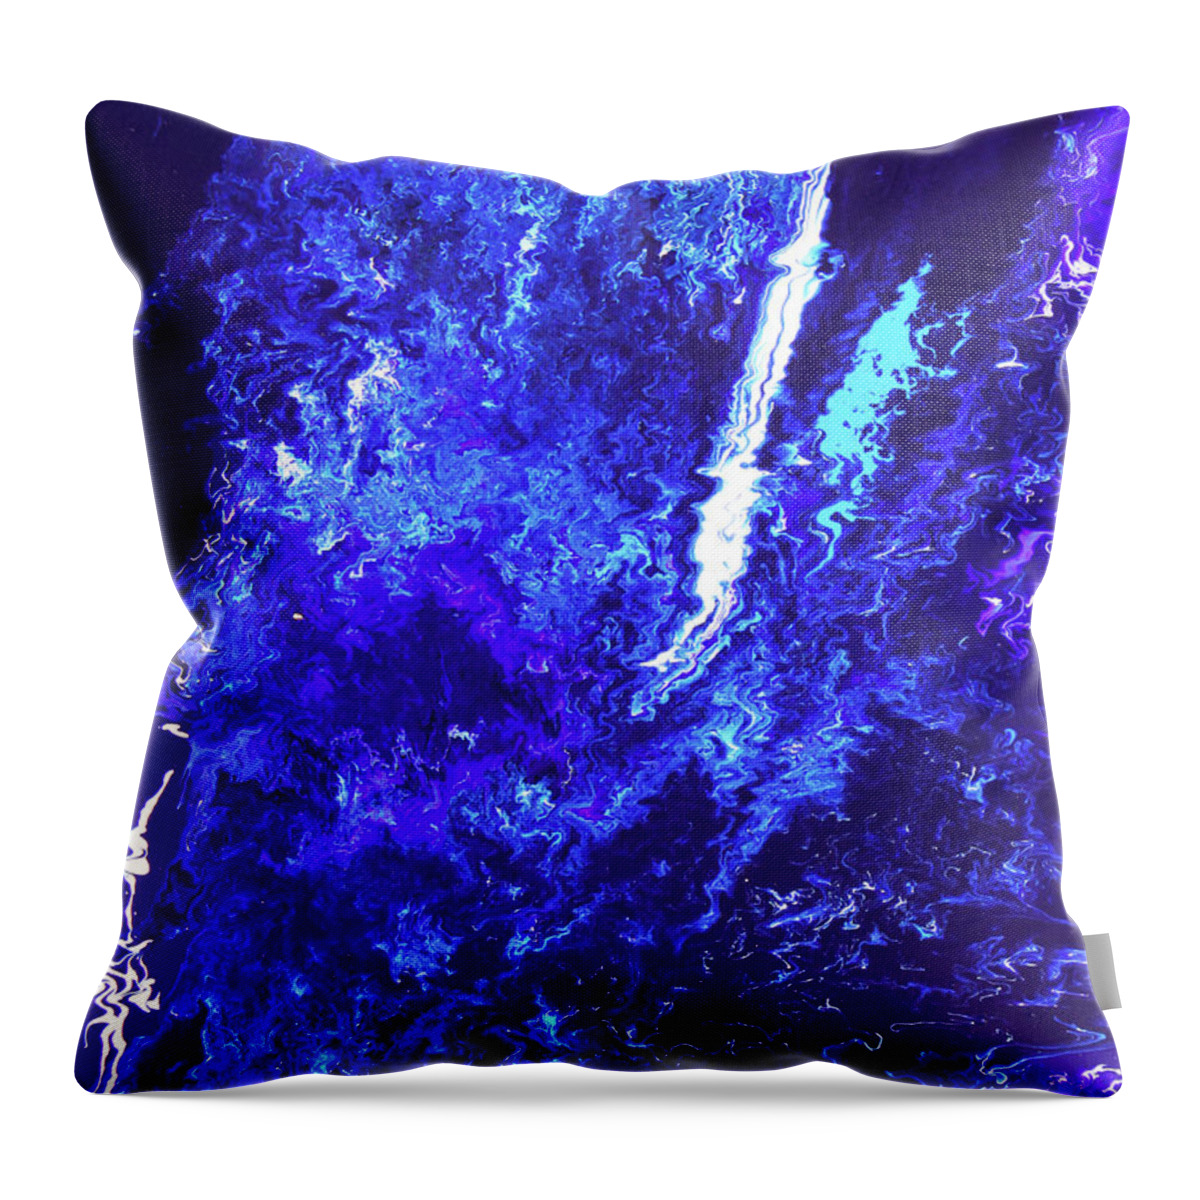 Fusionart Throw Pillow featuring the painting Plunge by Ralph White